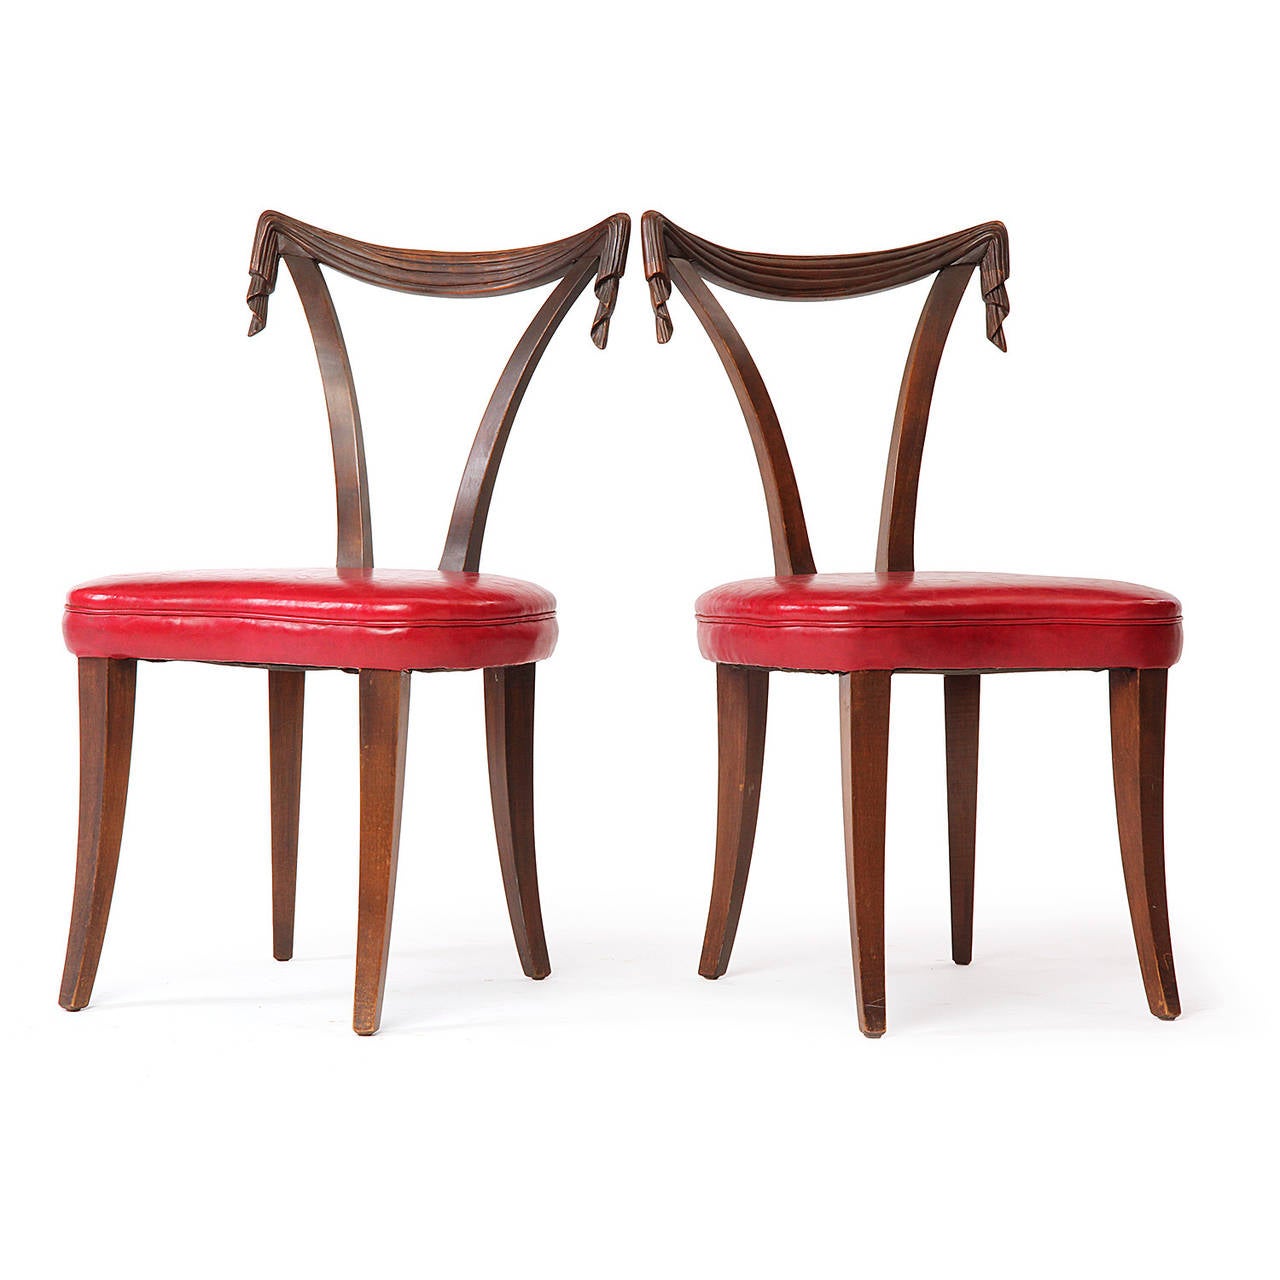 An elegant pair of occasional chairs having open backs with dramatic hand-carved draped and scrolling top rails and expressive seats of cherry red Naugahyde.